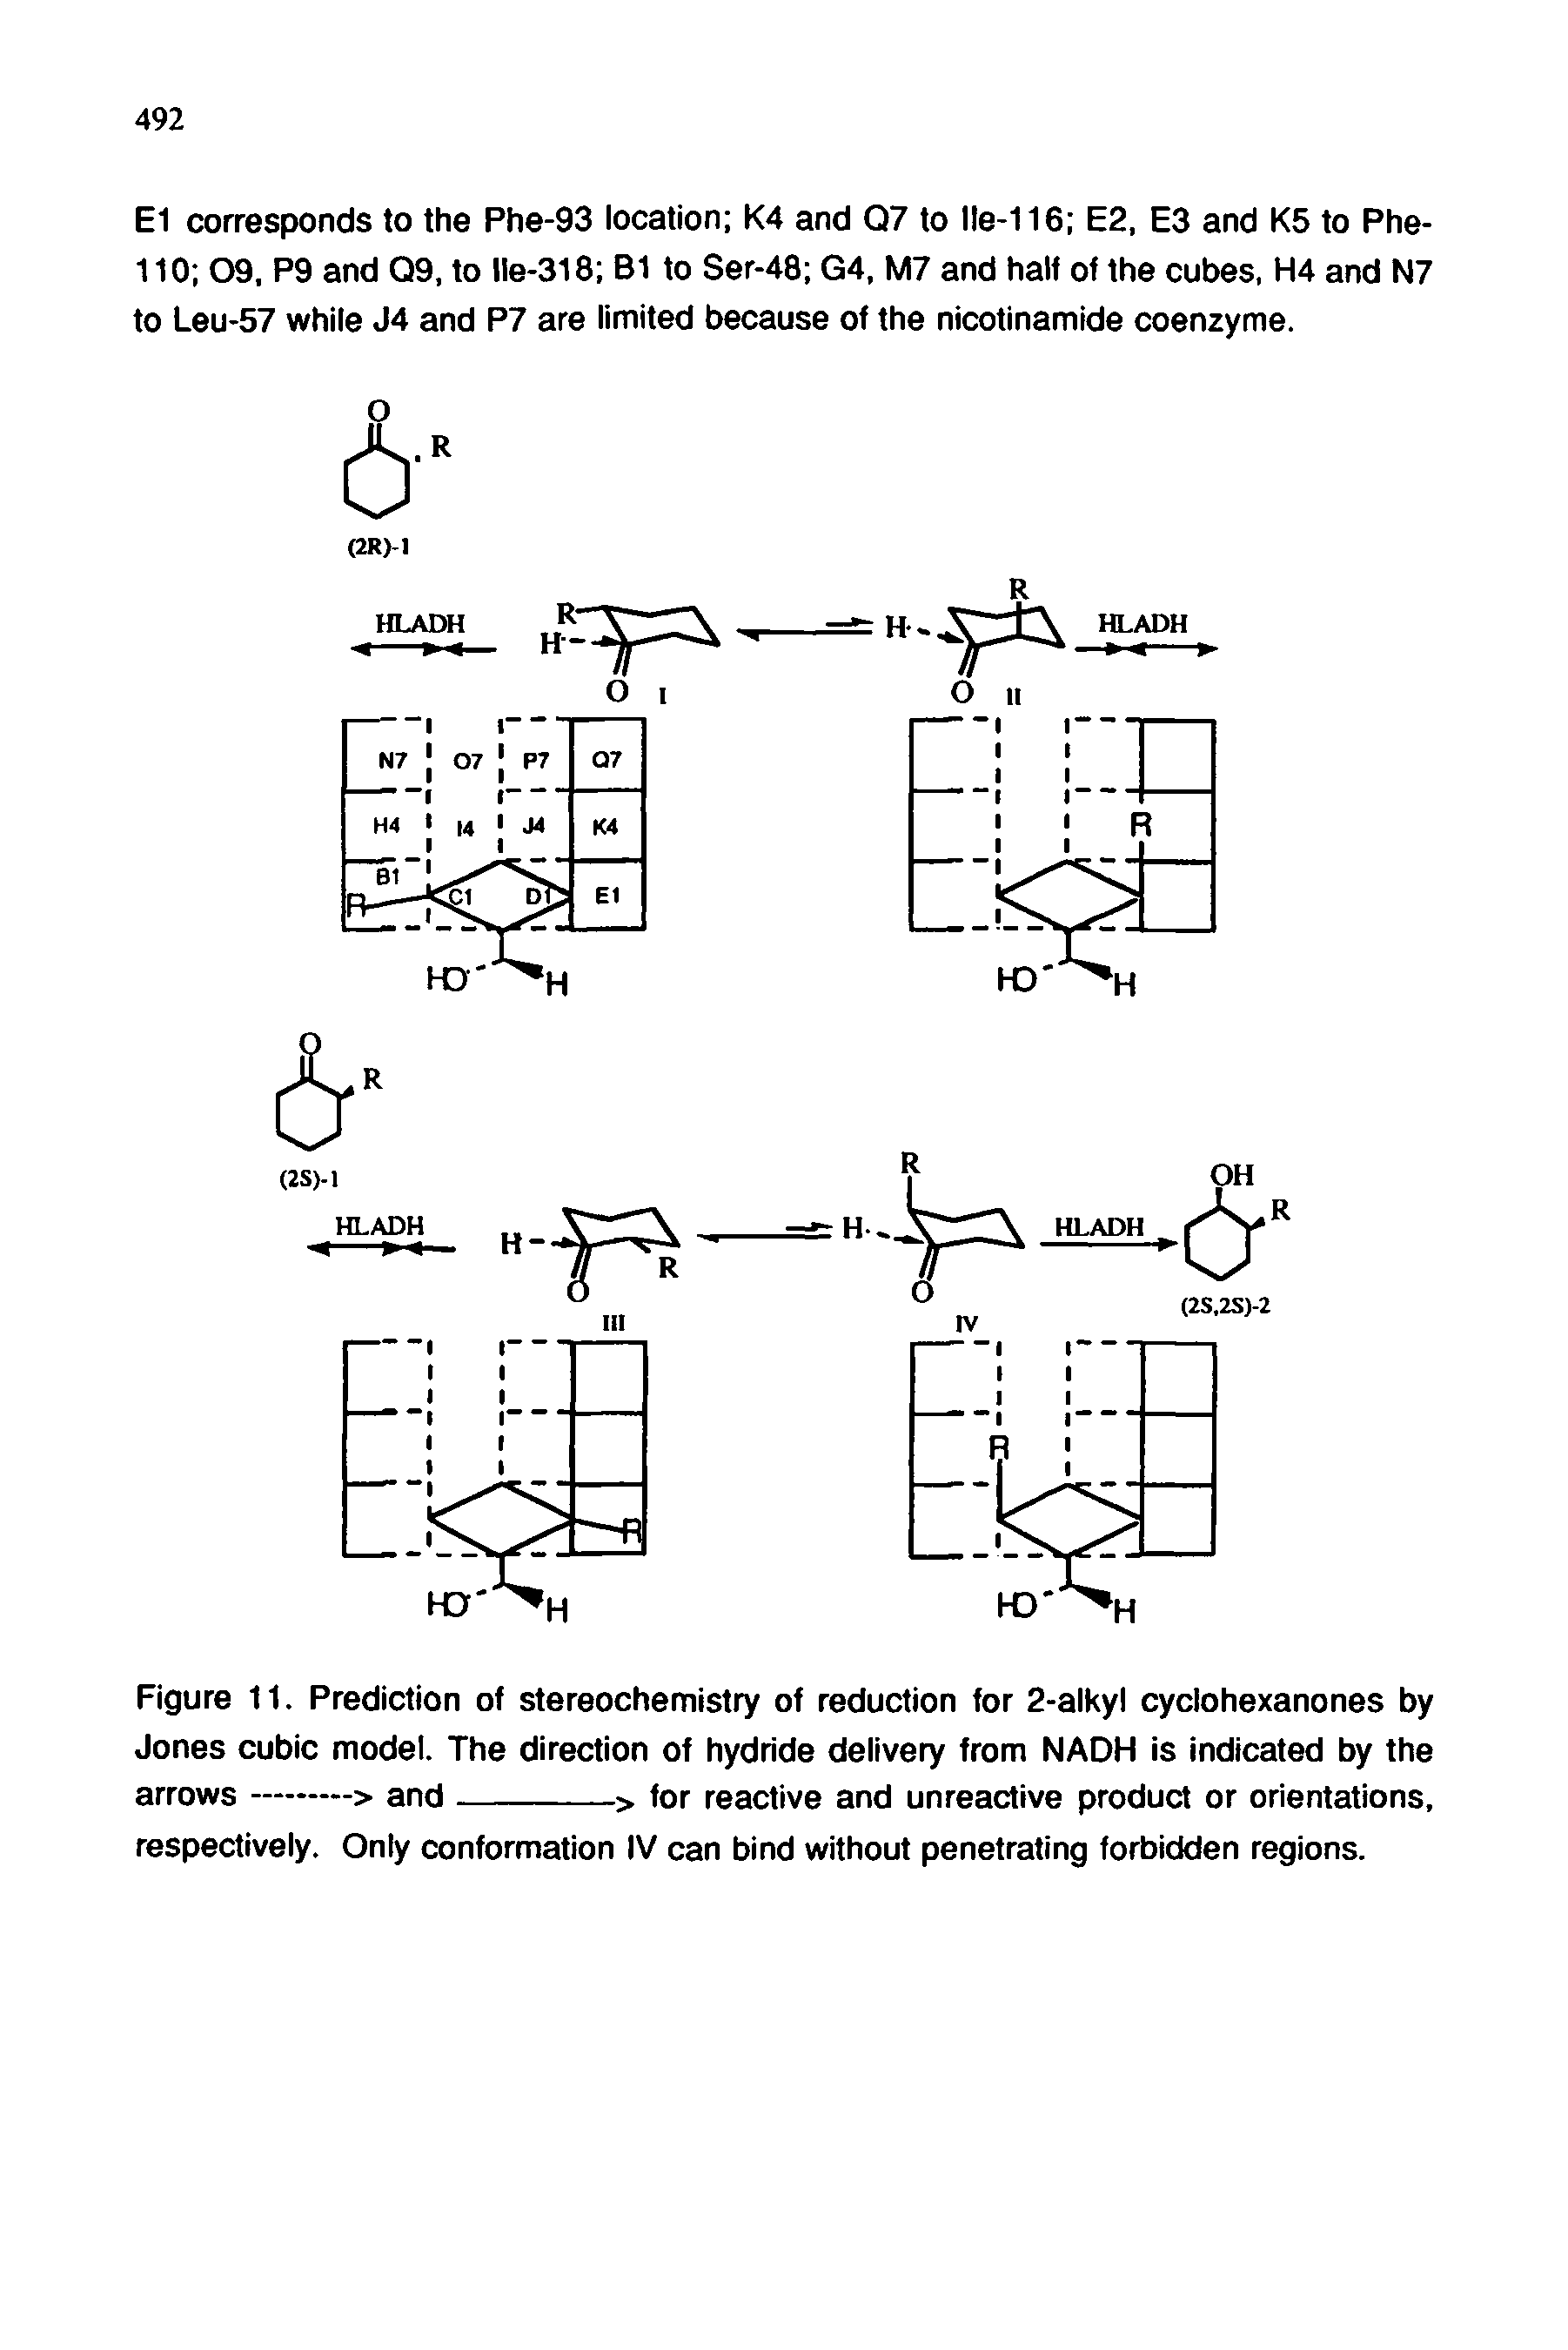 Figure 11. Prediction of stereochemistry of reduction for 2-alkyl cyclohexanones by Jones cubic model. The direction of hydride delivery from NADH is indicated by the...